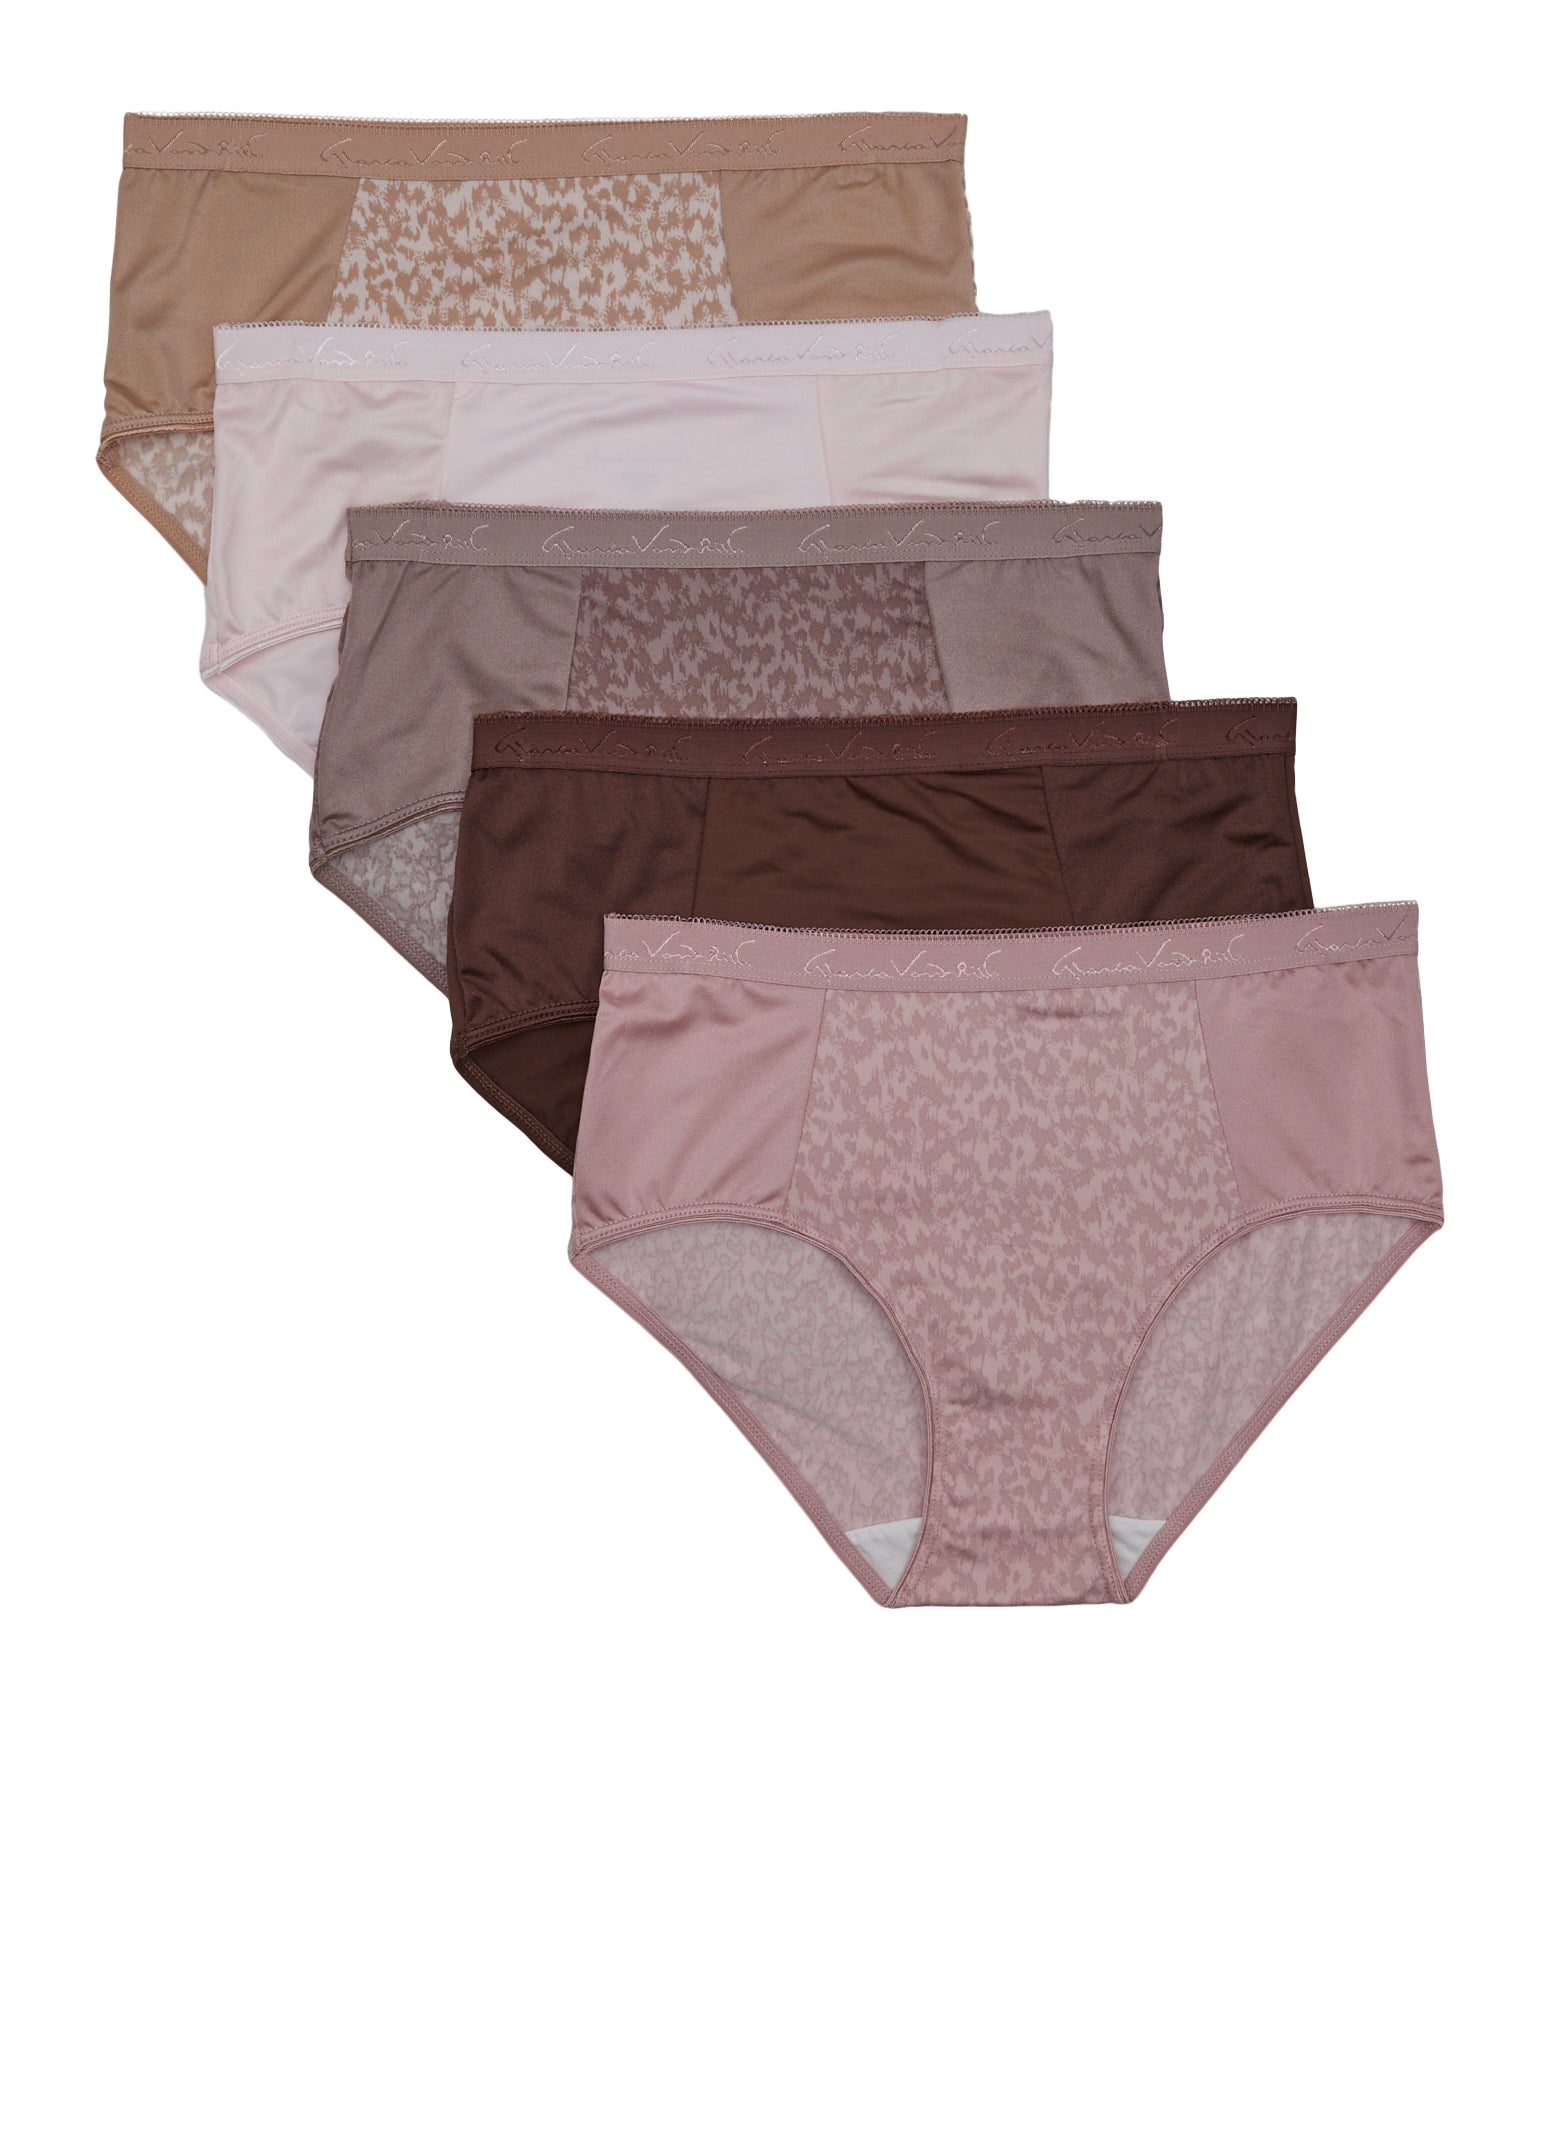 Patterned Hipster Brief Panty 5 Pack - Multi Color